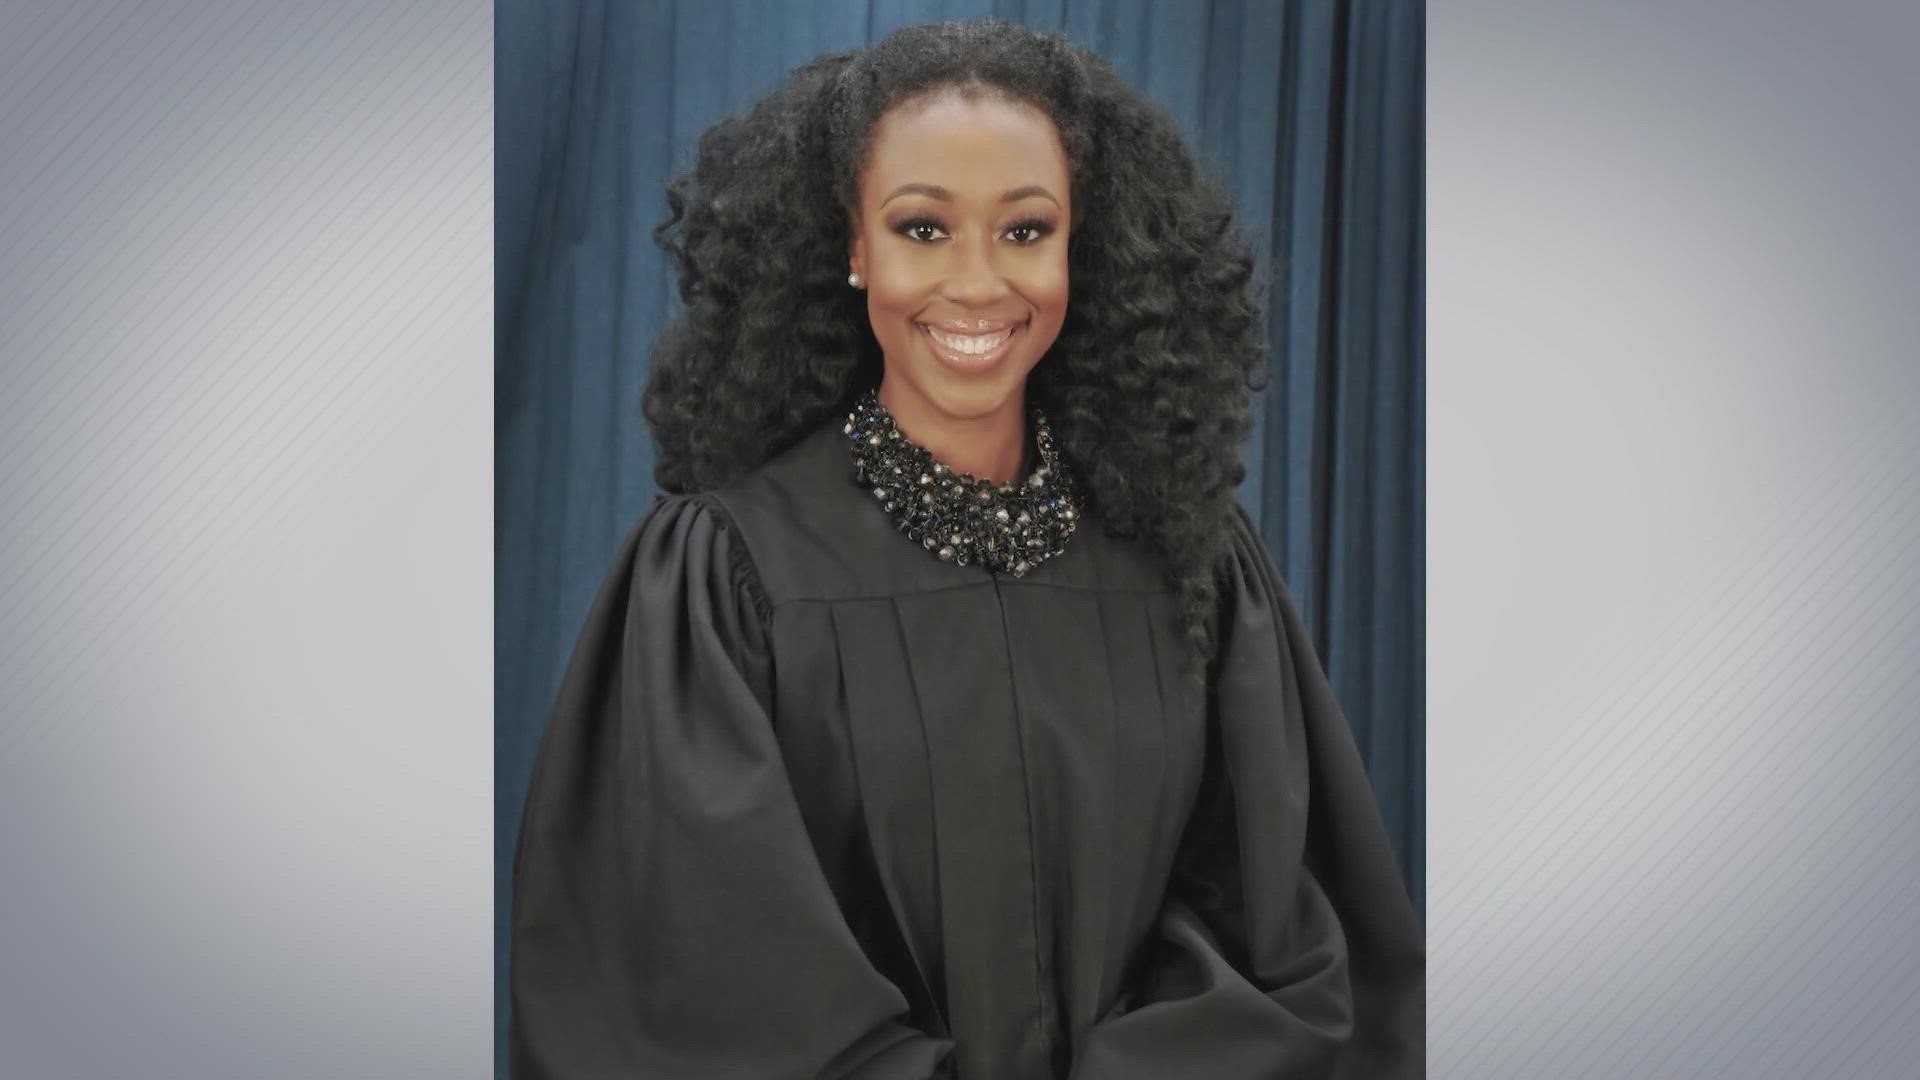 Dallas County District Judge Amber Givens was recused after attorneys claimed she was biased and that her court was ineffective.